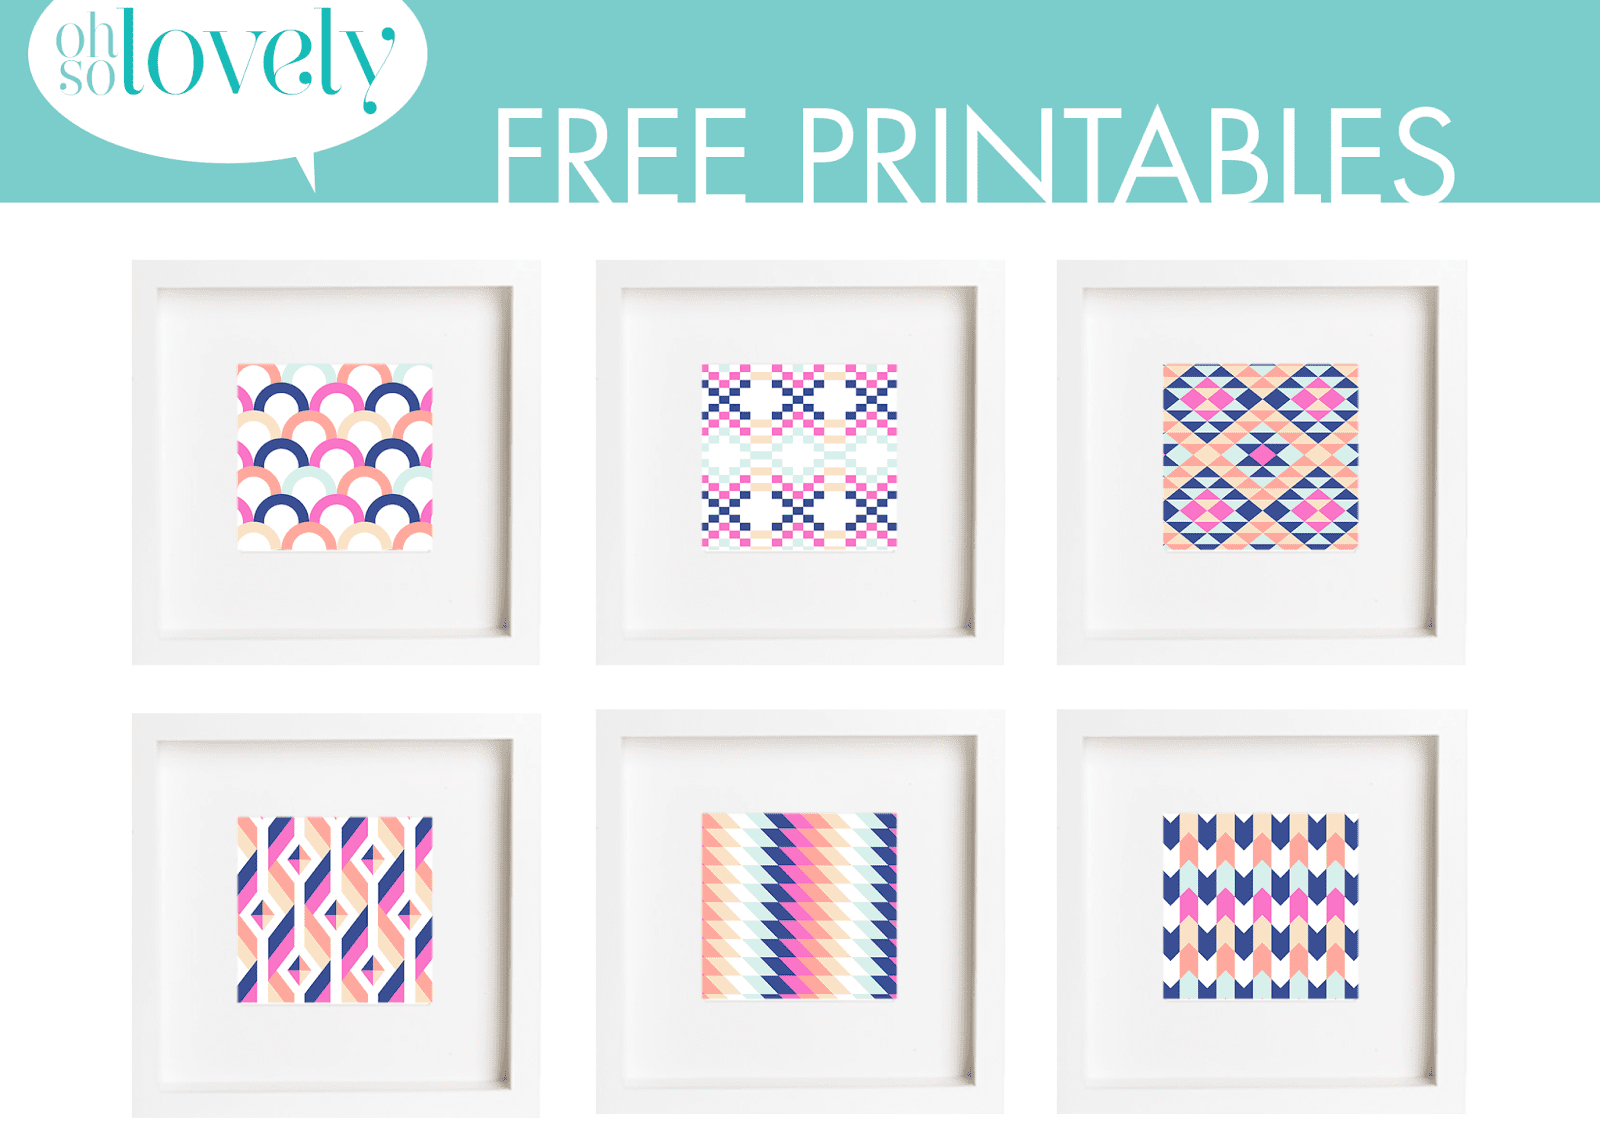 11 Places To Find Free, Printable Wall Art Online - Free Printable Art